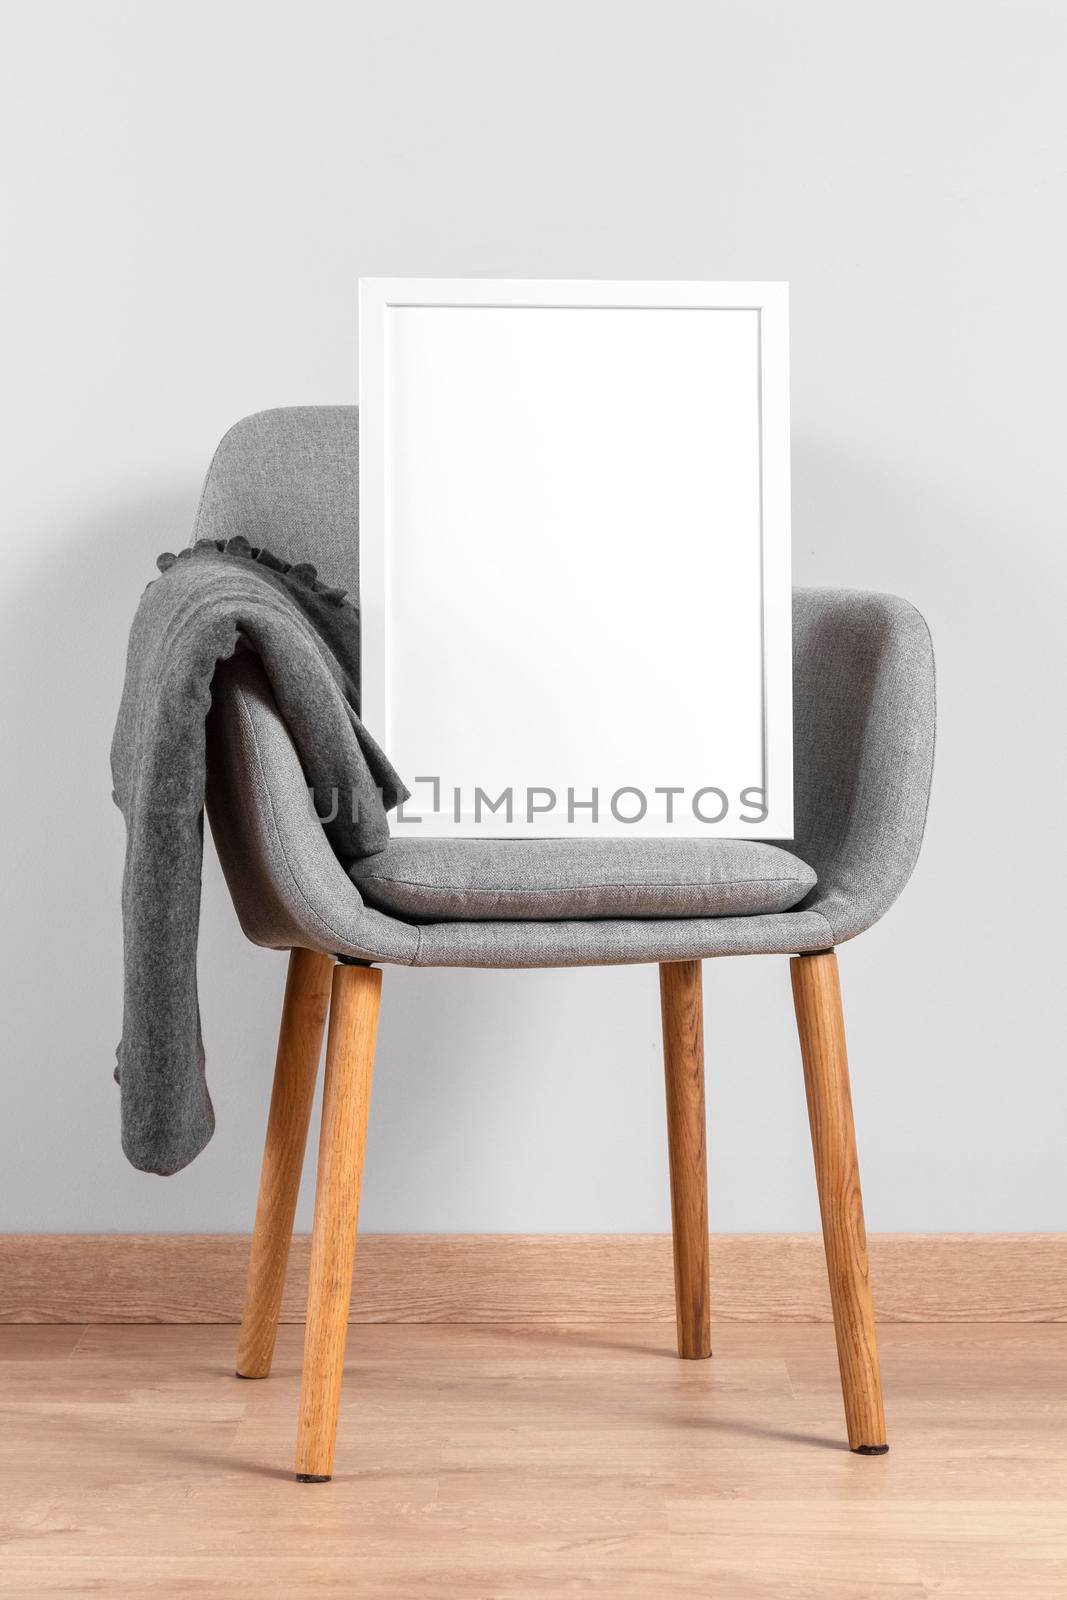 frame mock up chair by Zahard